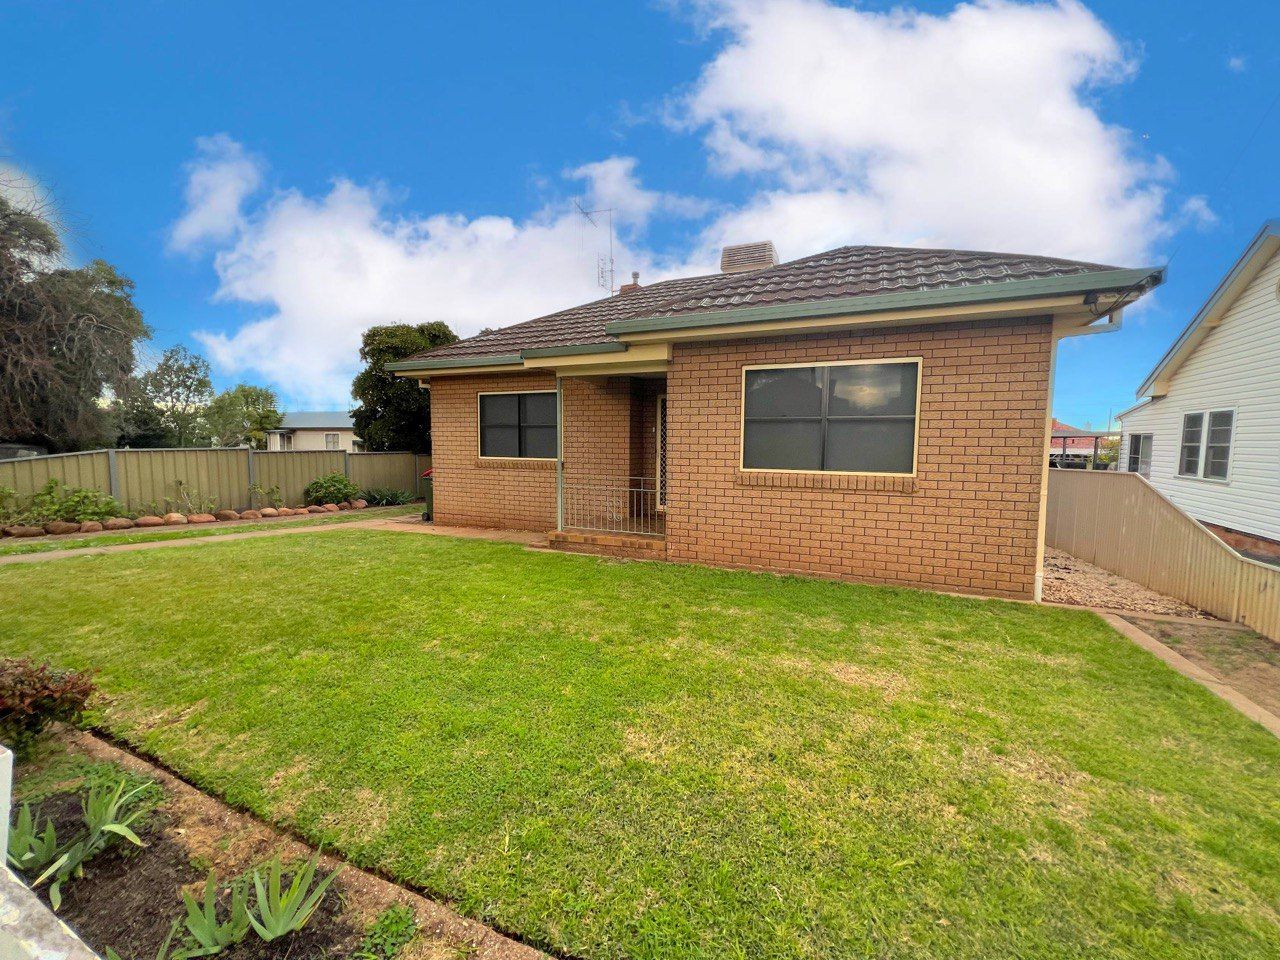 3 bedrooms House in 7 Belmore Avenue PARKES NSW, 2870